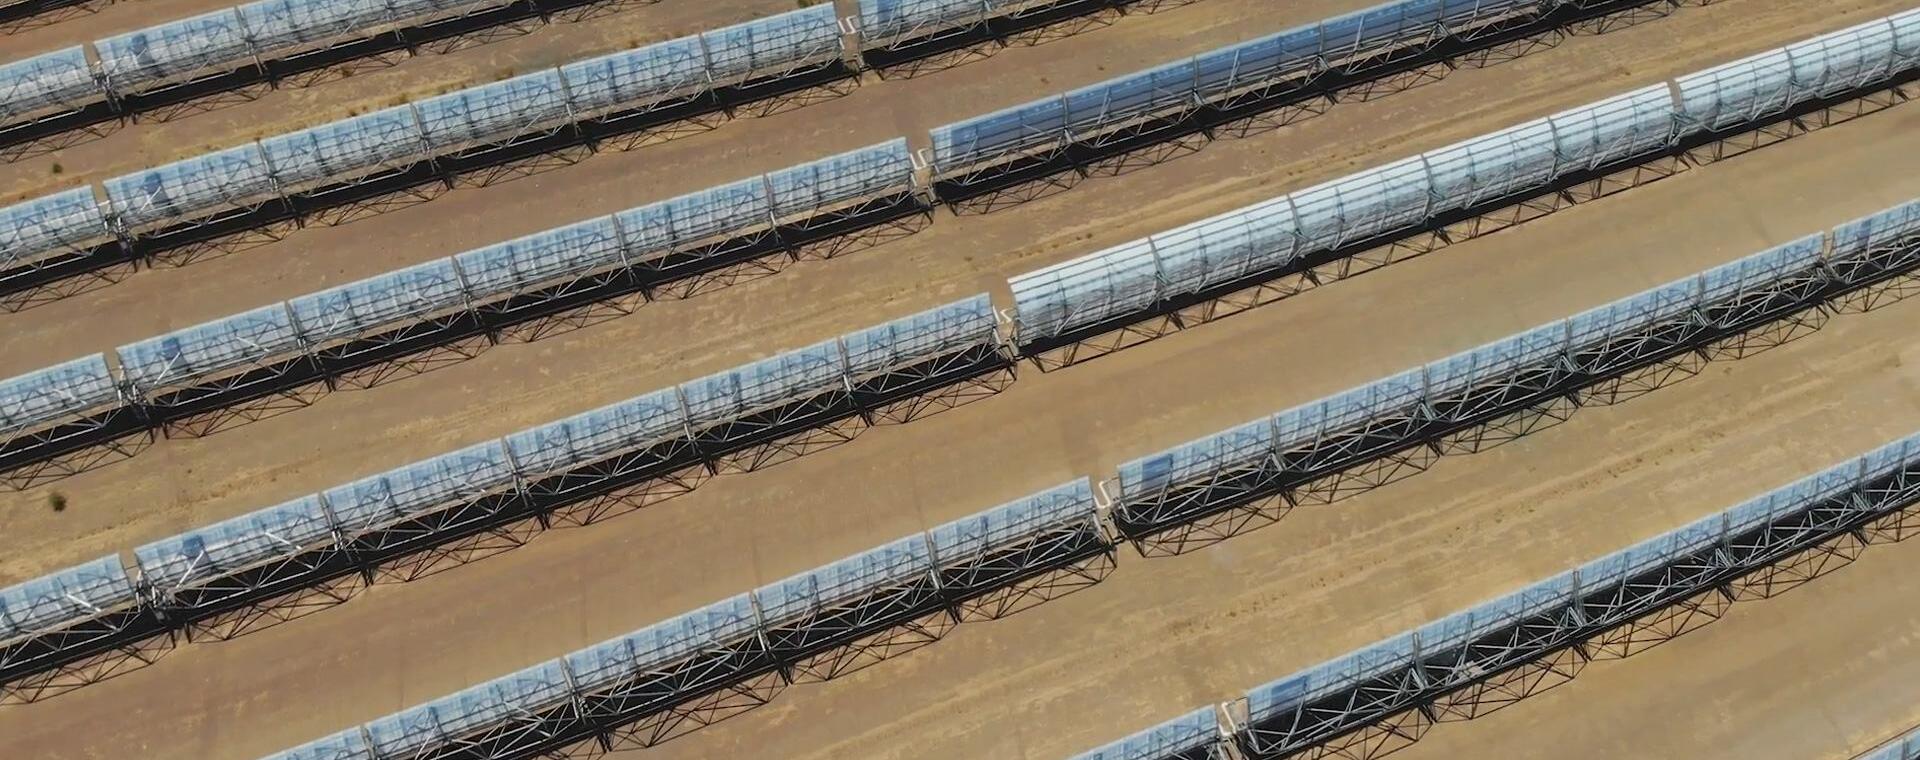 Scaling-up solar power in South Africa’s Northern Cape